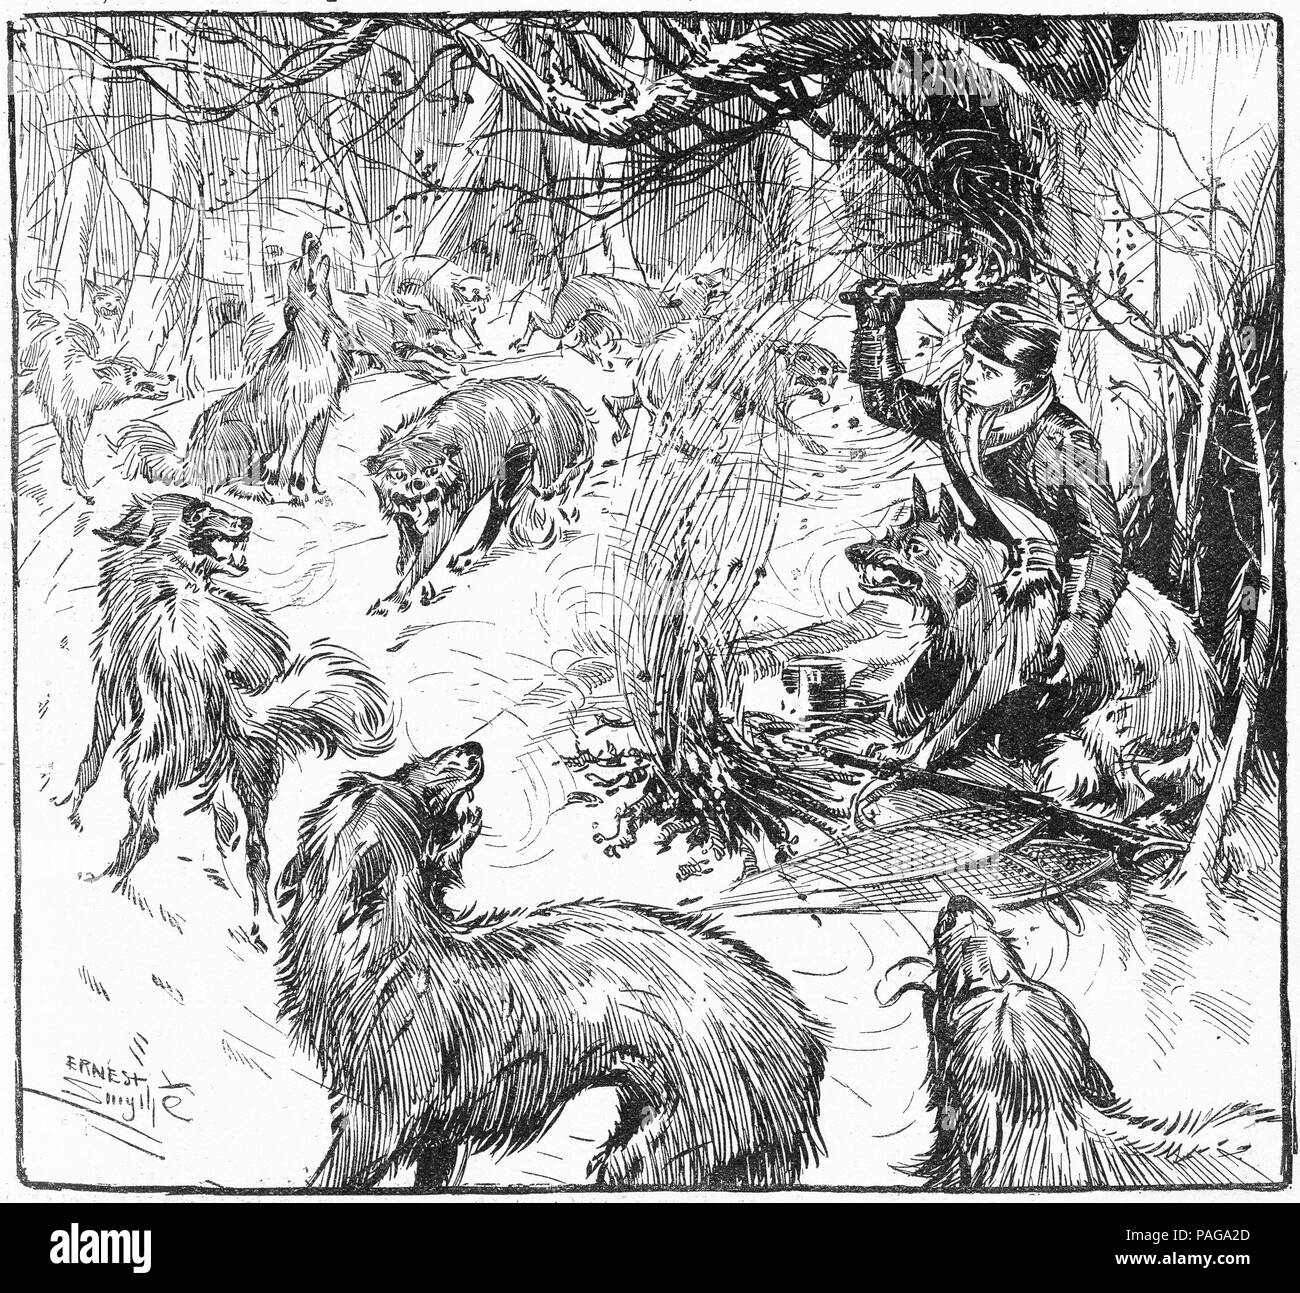 Engraving of an adventurer using a fire to keep a pack of wolves at bay in the far north. From Chums, An Illustrated Magazine for Boys, 1916. Stock Photo